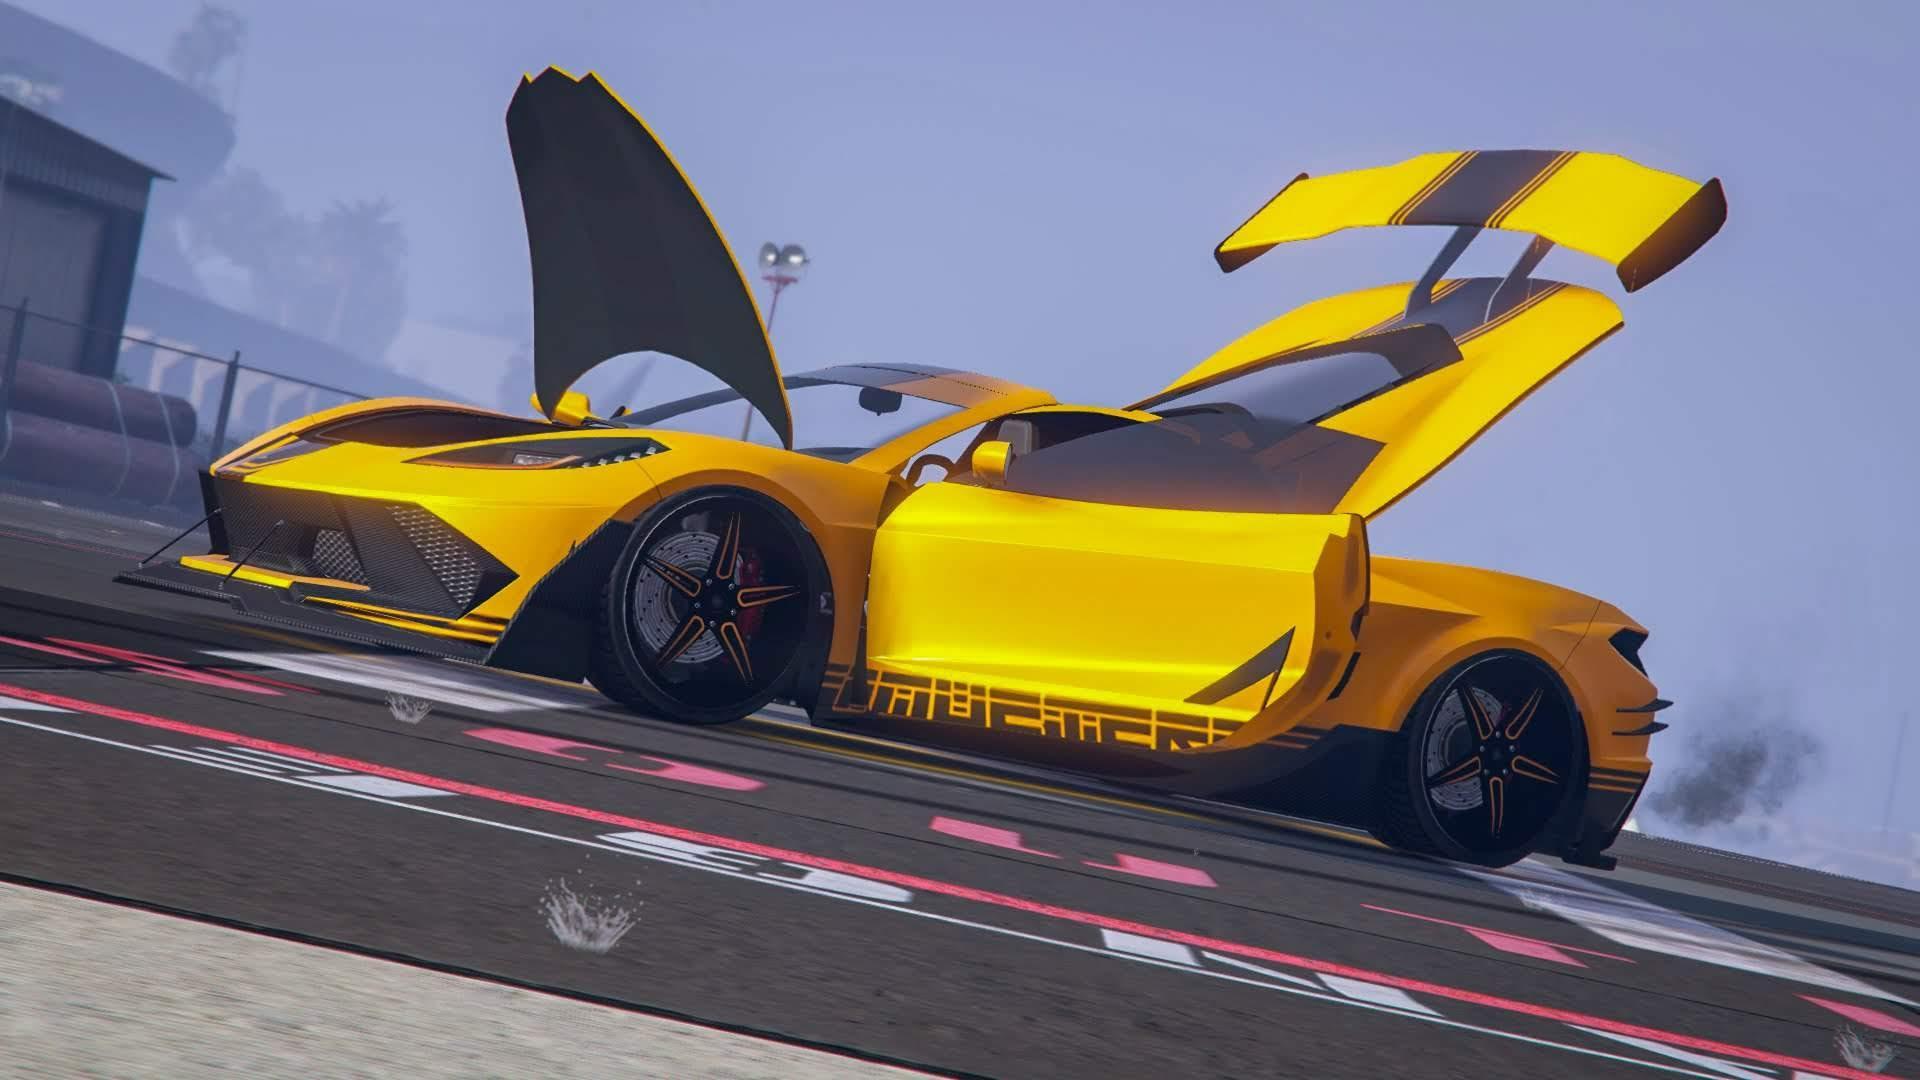 Invetero Coquette D10  GTA 5 Online Vehicle Stats, Price, How To Get